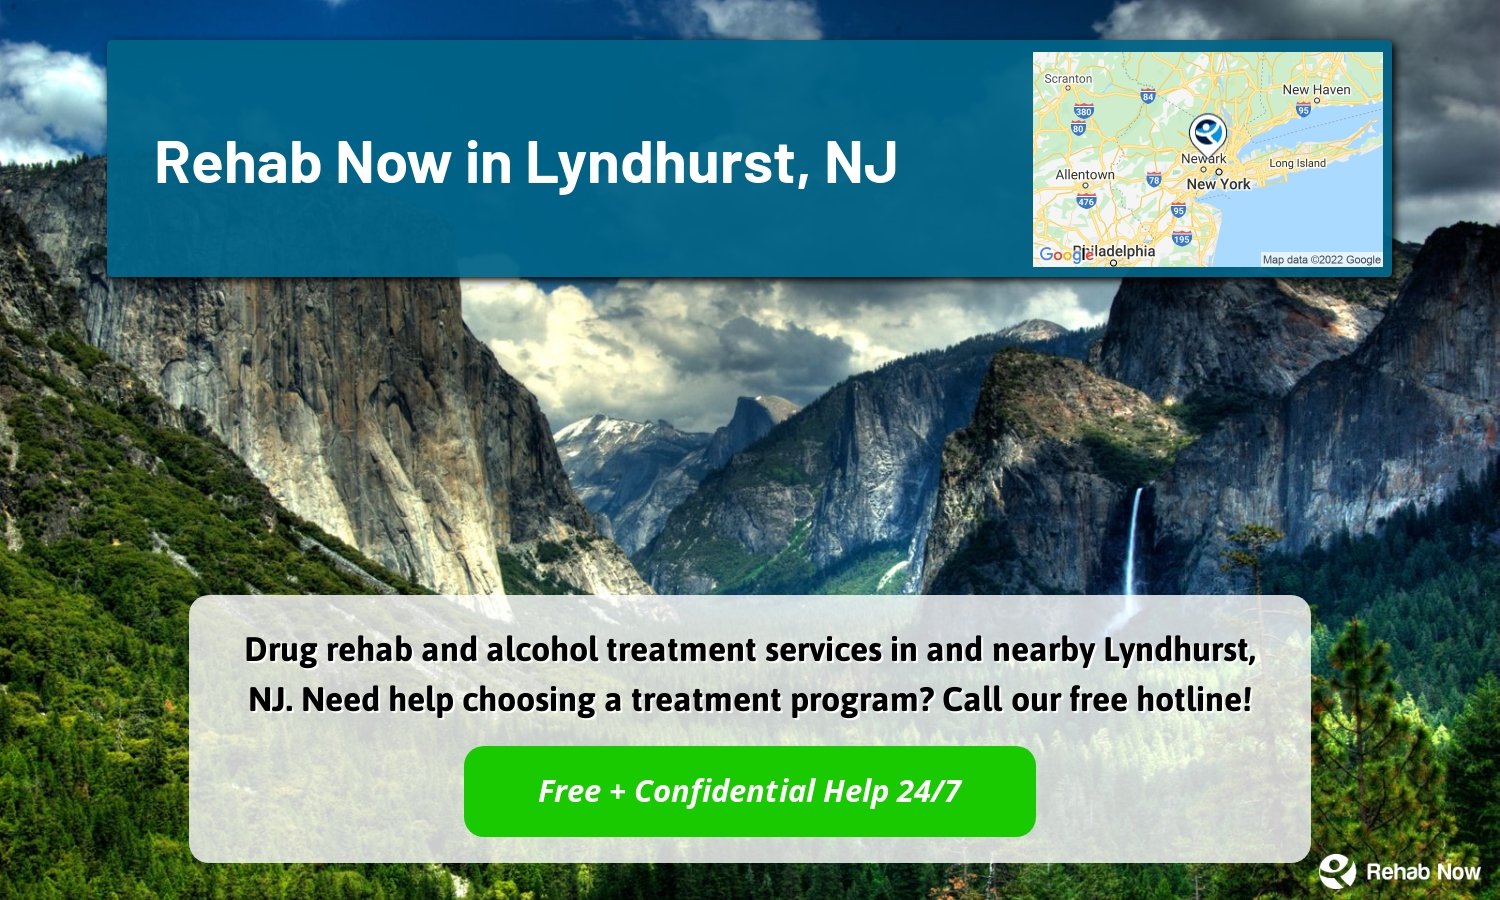 Drug rehab and alcohol treatment services in and nearby Lyndhurst, NJ. Need help choosing a treatment program? Call our free hotline!